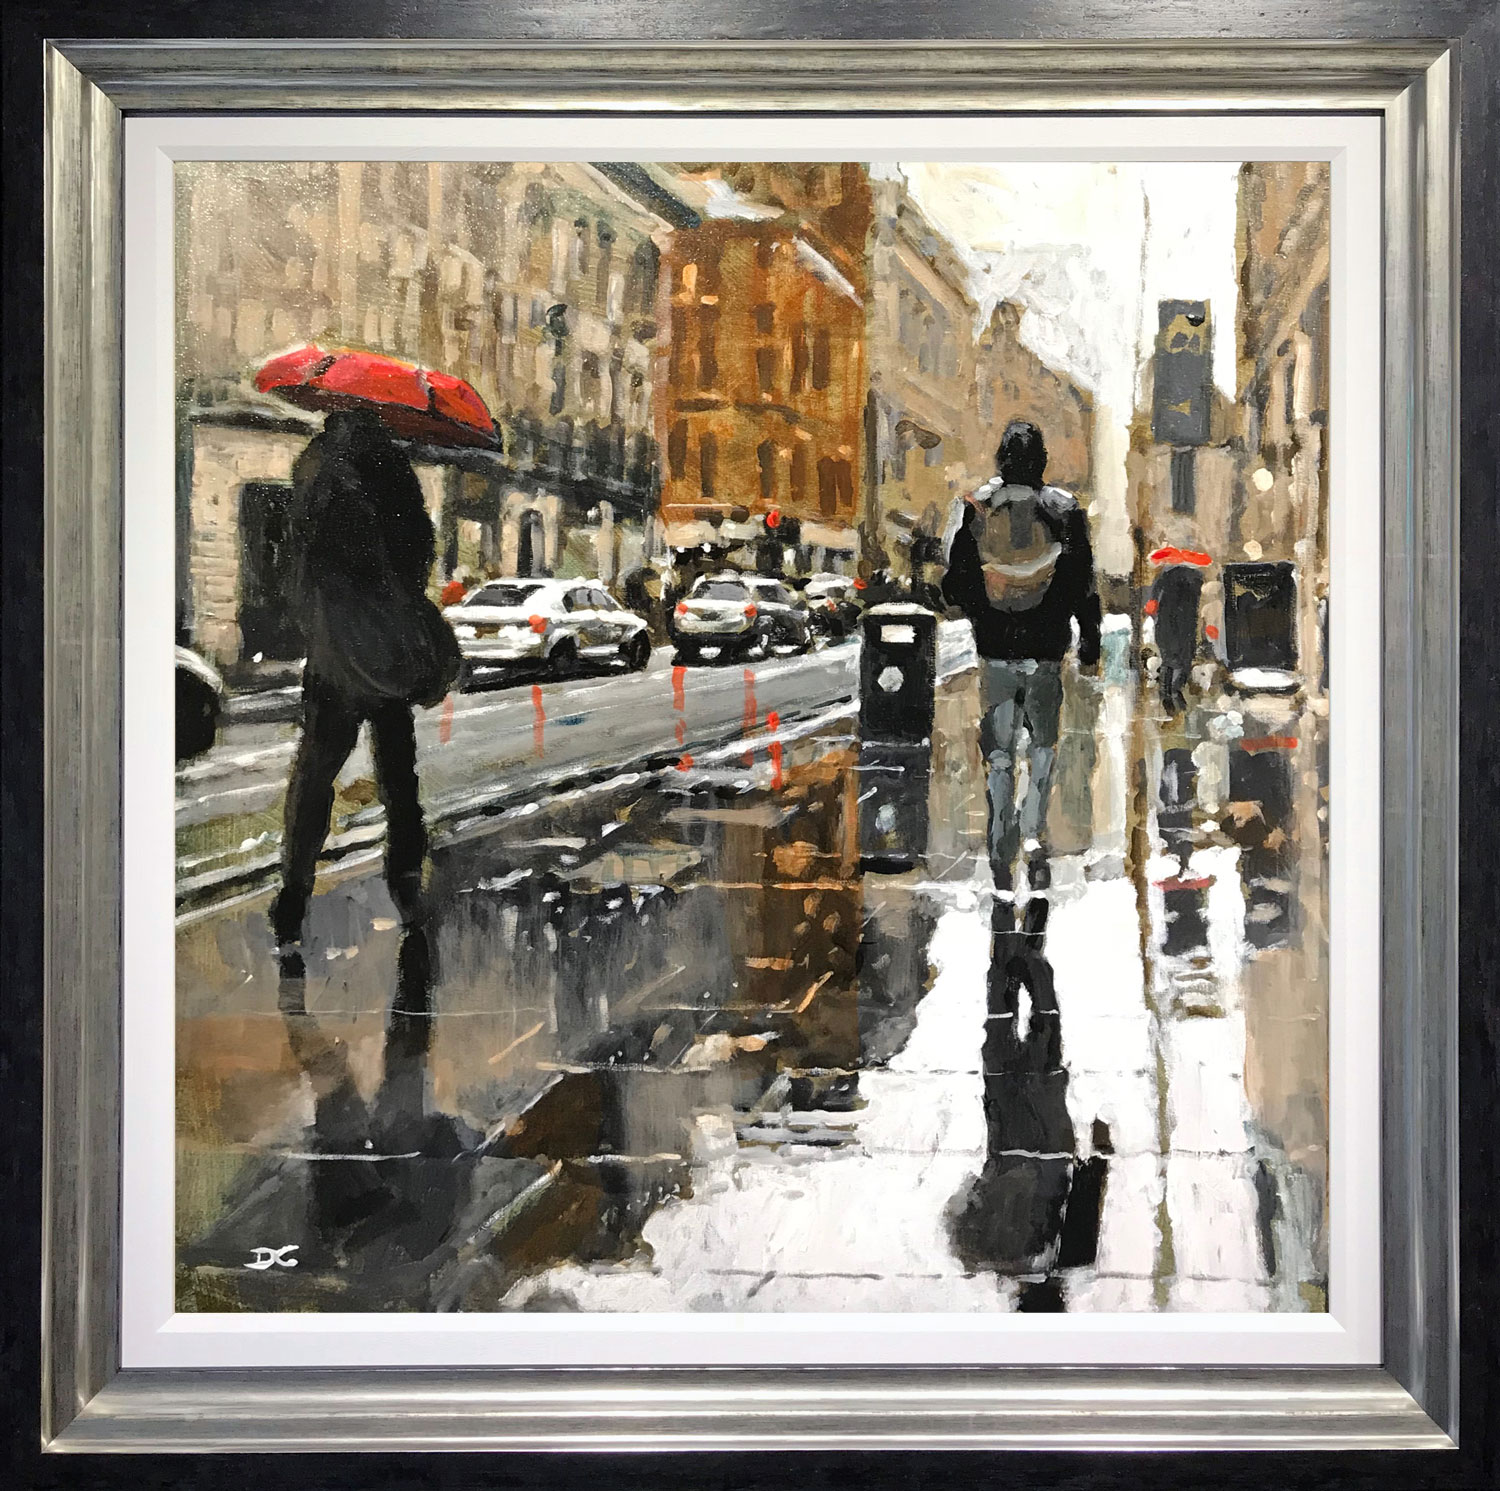 David Coulter Wet Traffic, Cross Street are Original Painting for sale